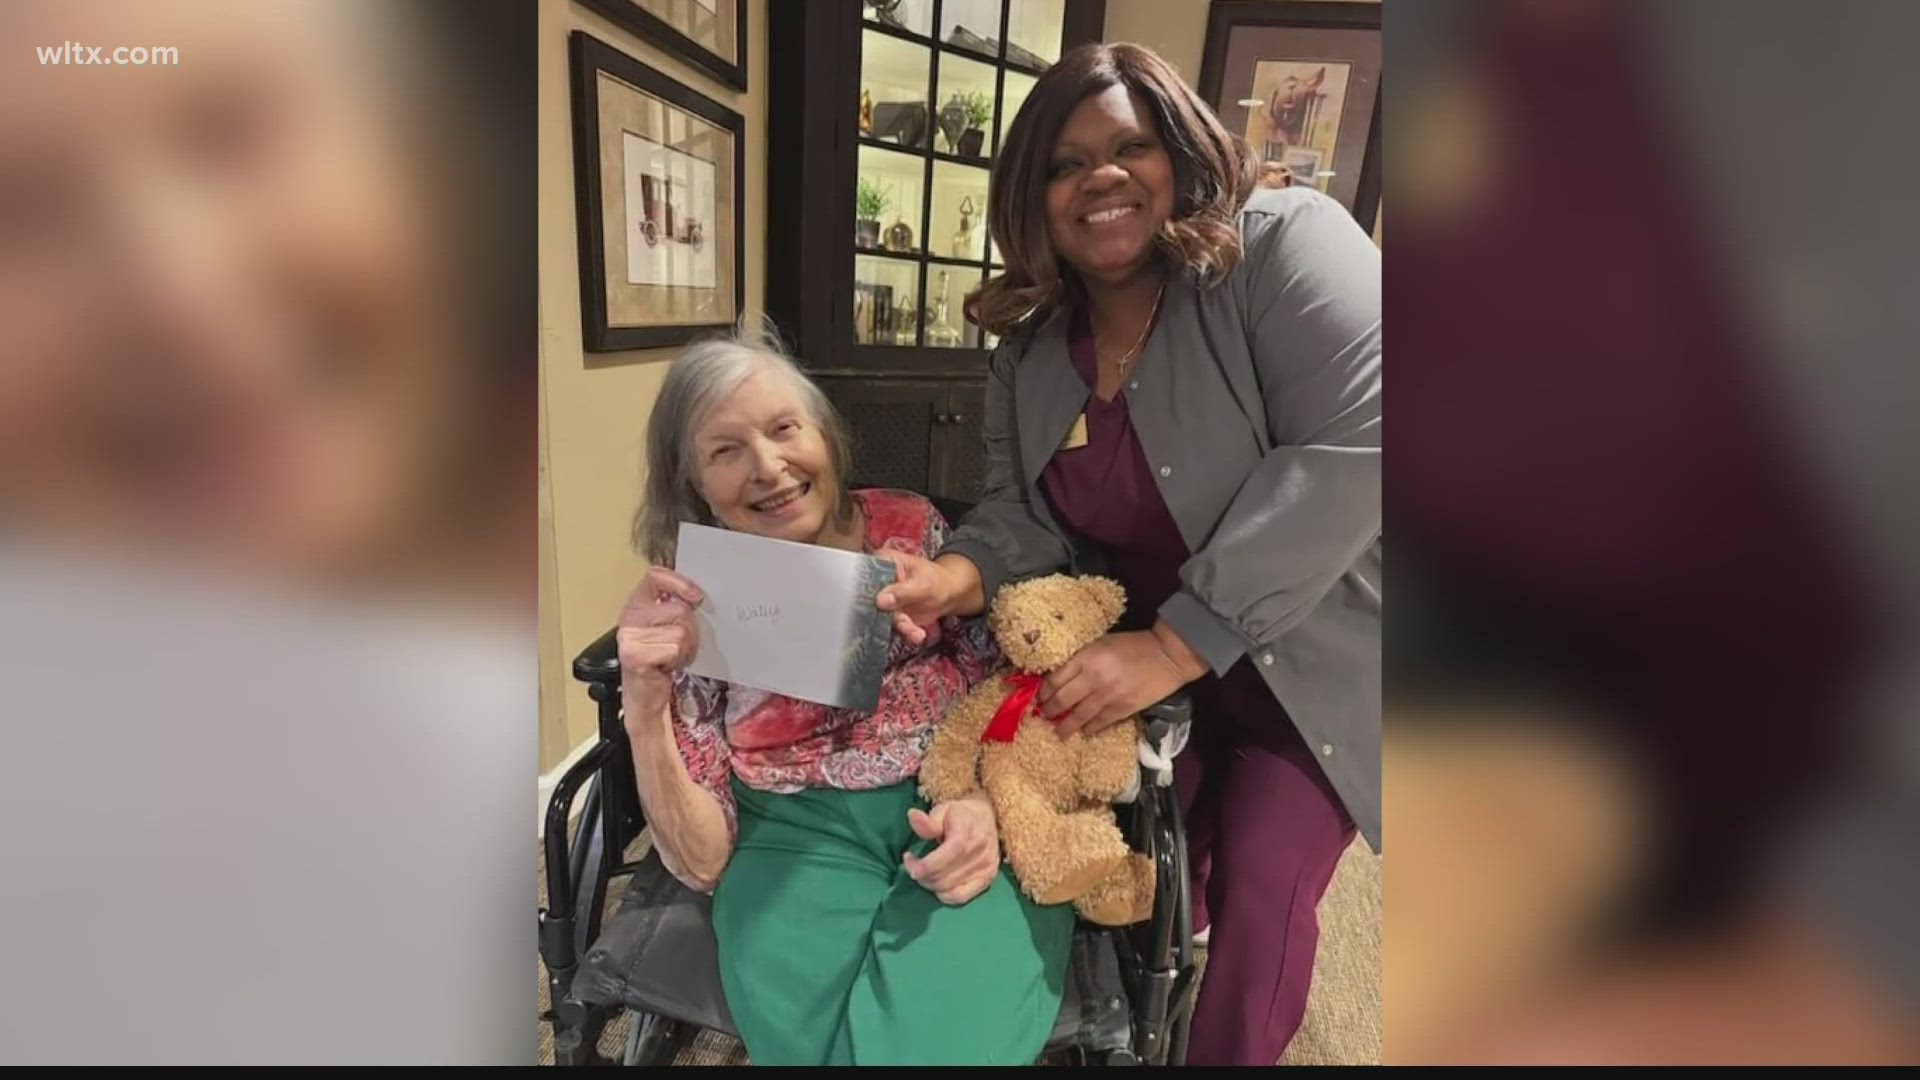 A charity that accepts donations of Christmas gifts for the elderly was able to serve more than 1,000 people this year thanks to community help.